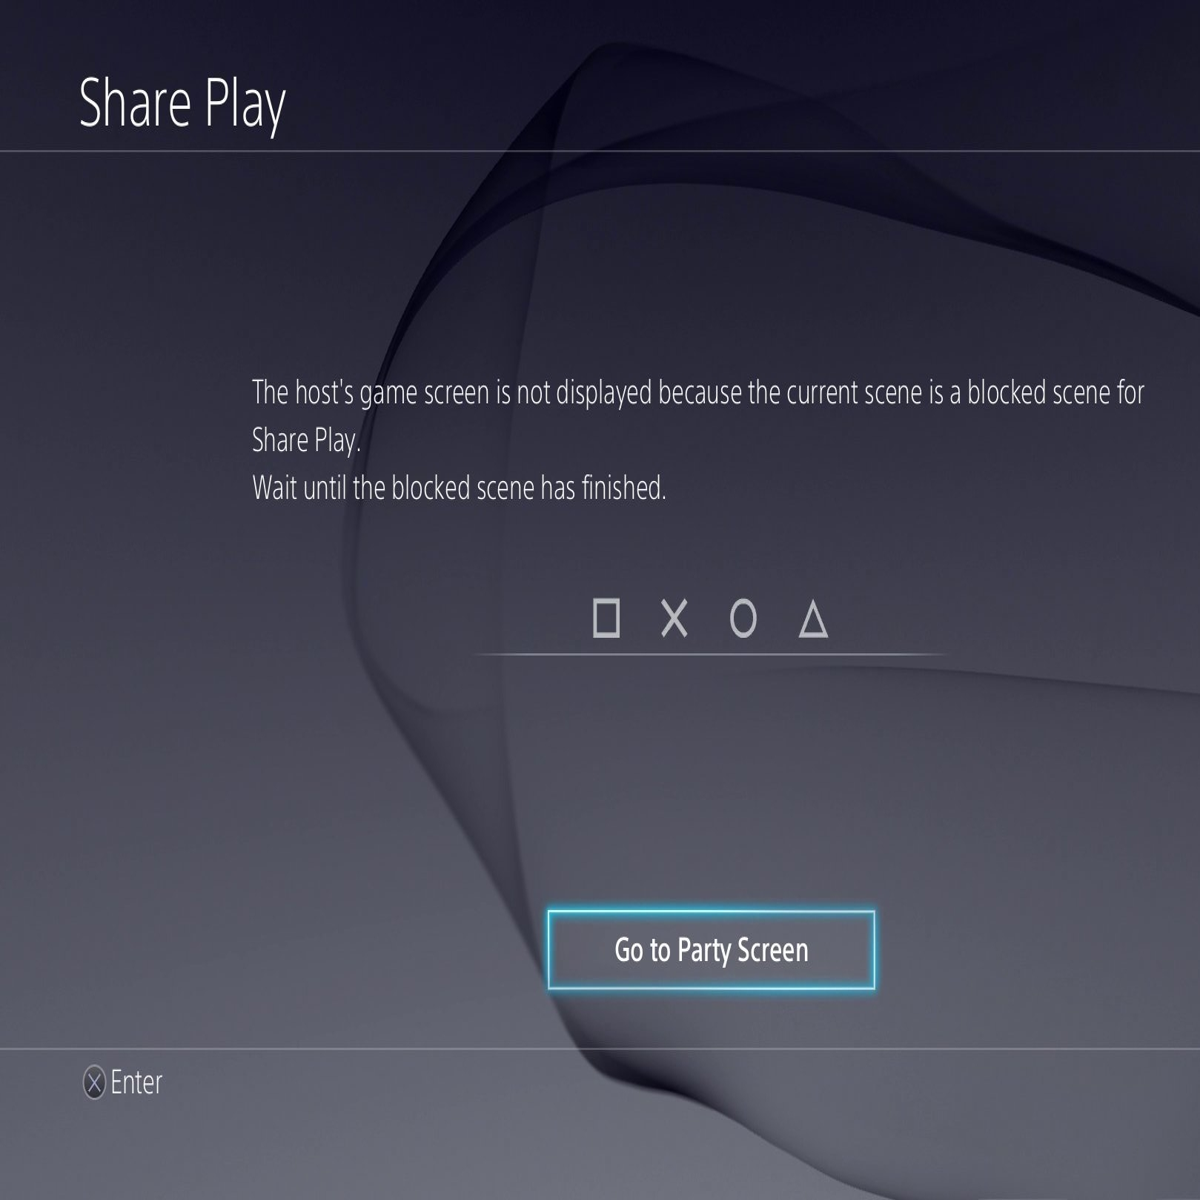 Don't Own a PS5 Yet? Here's How to Gameshare on PS4 - CNET